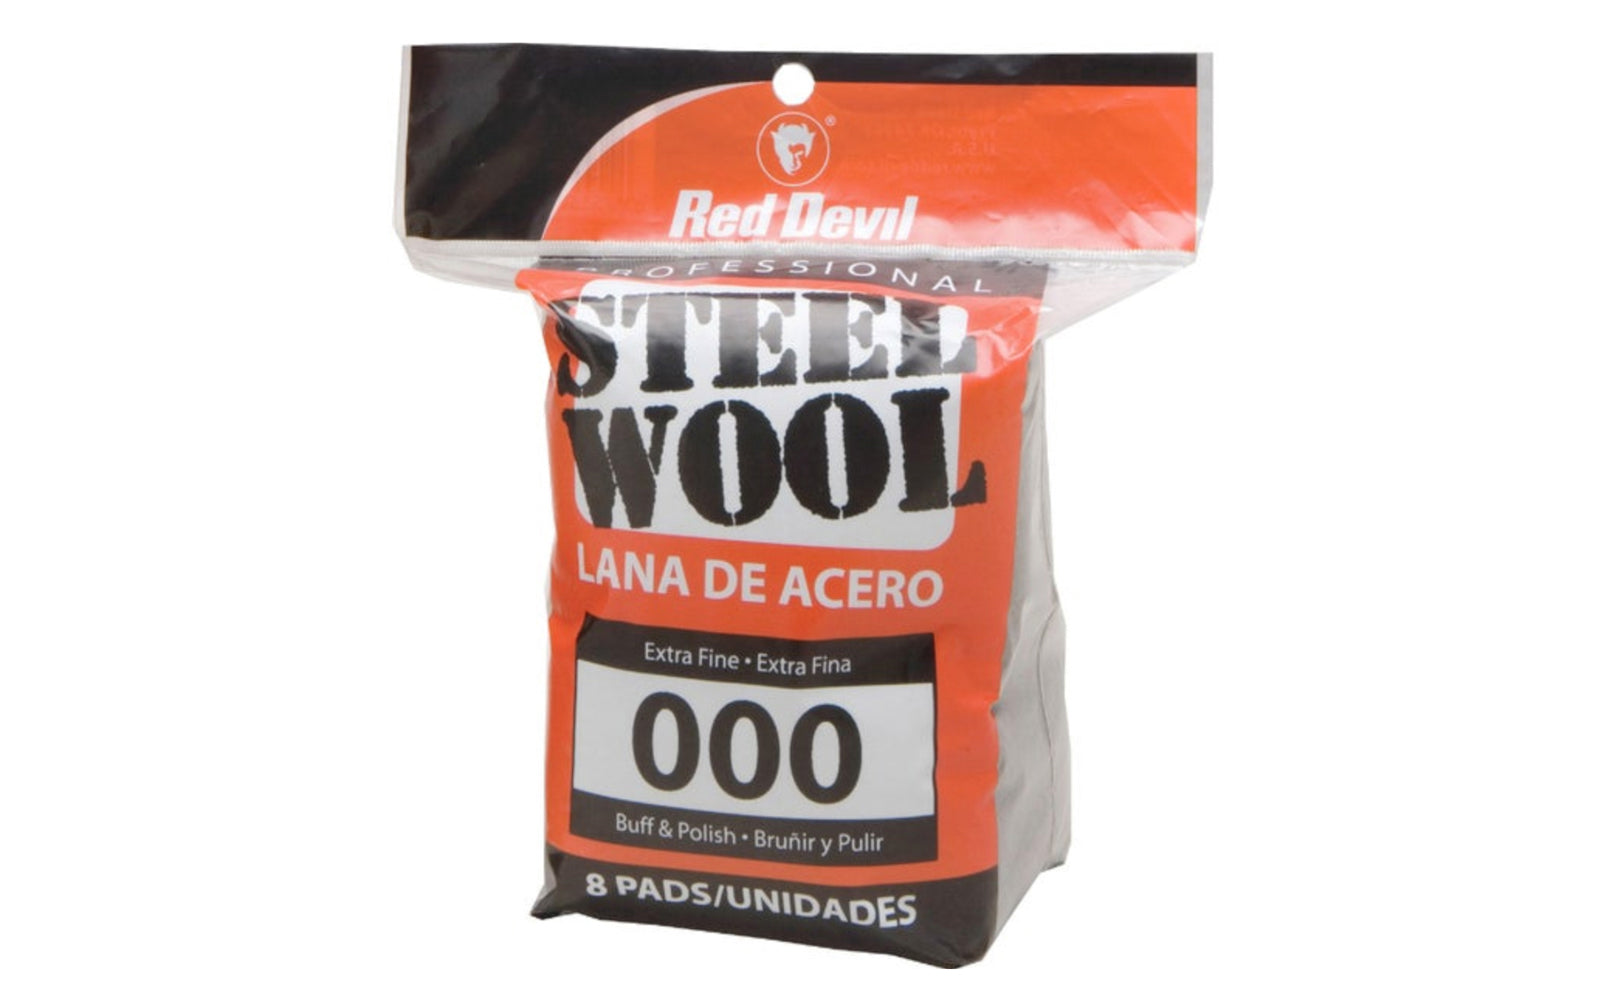 Red Devil #000 Extra Fine Steel Wool - 8 Pack. Very fine buffing & polishing use steel wool. Good for cleaning & polishing stainless steel, preparing surfaces between coats of varnish, removing dried paint drips, use for auto finishing, removing rust spots from chrome, etc. Made by Red Devil, Inc.